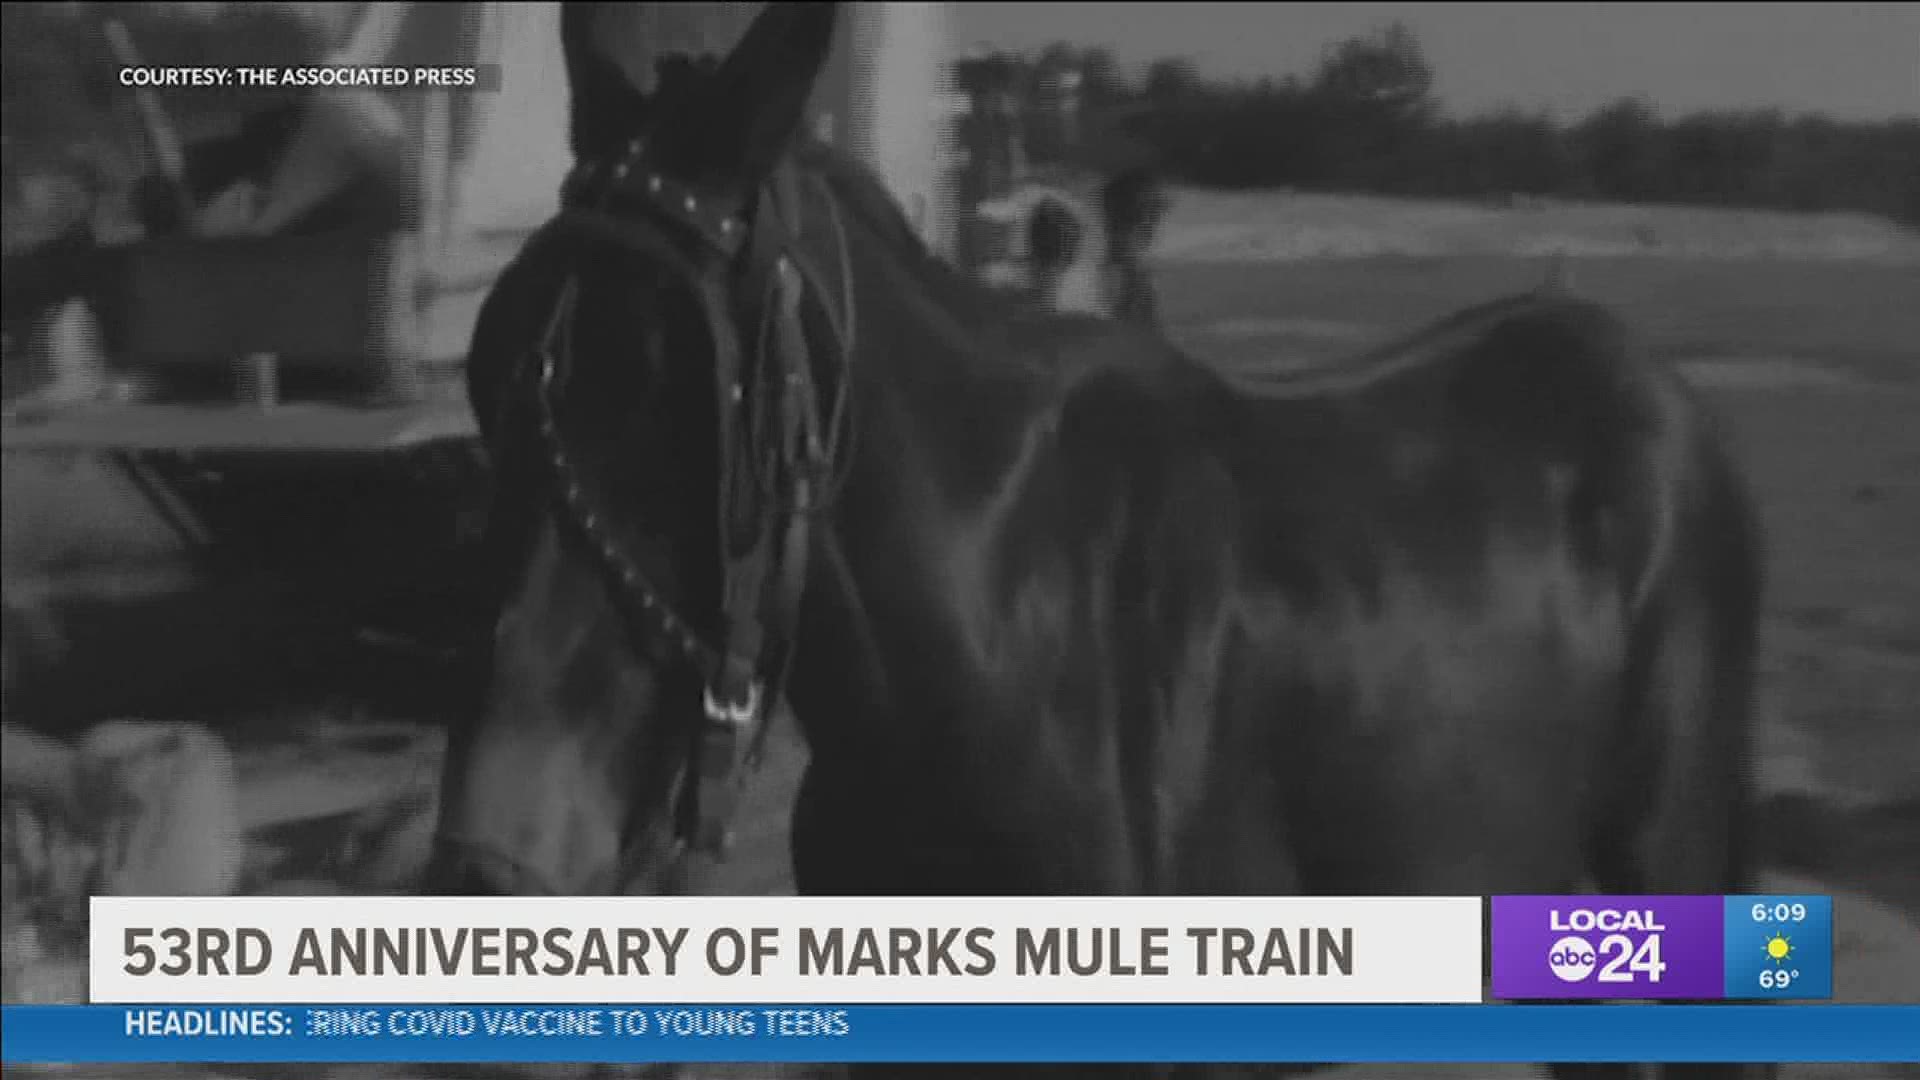 Mule Train, which was part of the Poor People’s Campaign, began 53 years ago: May 13, 1968.